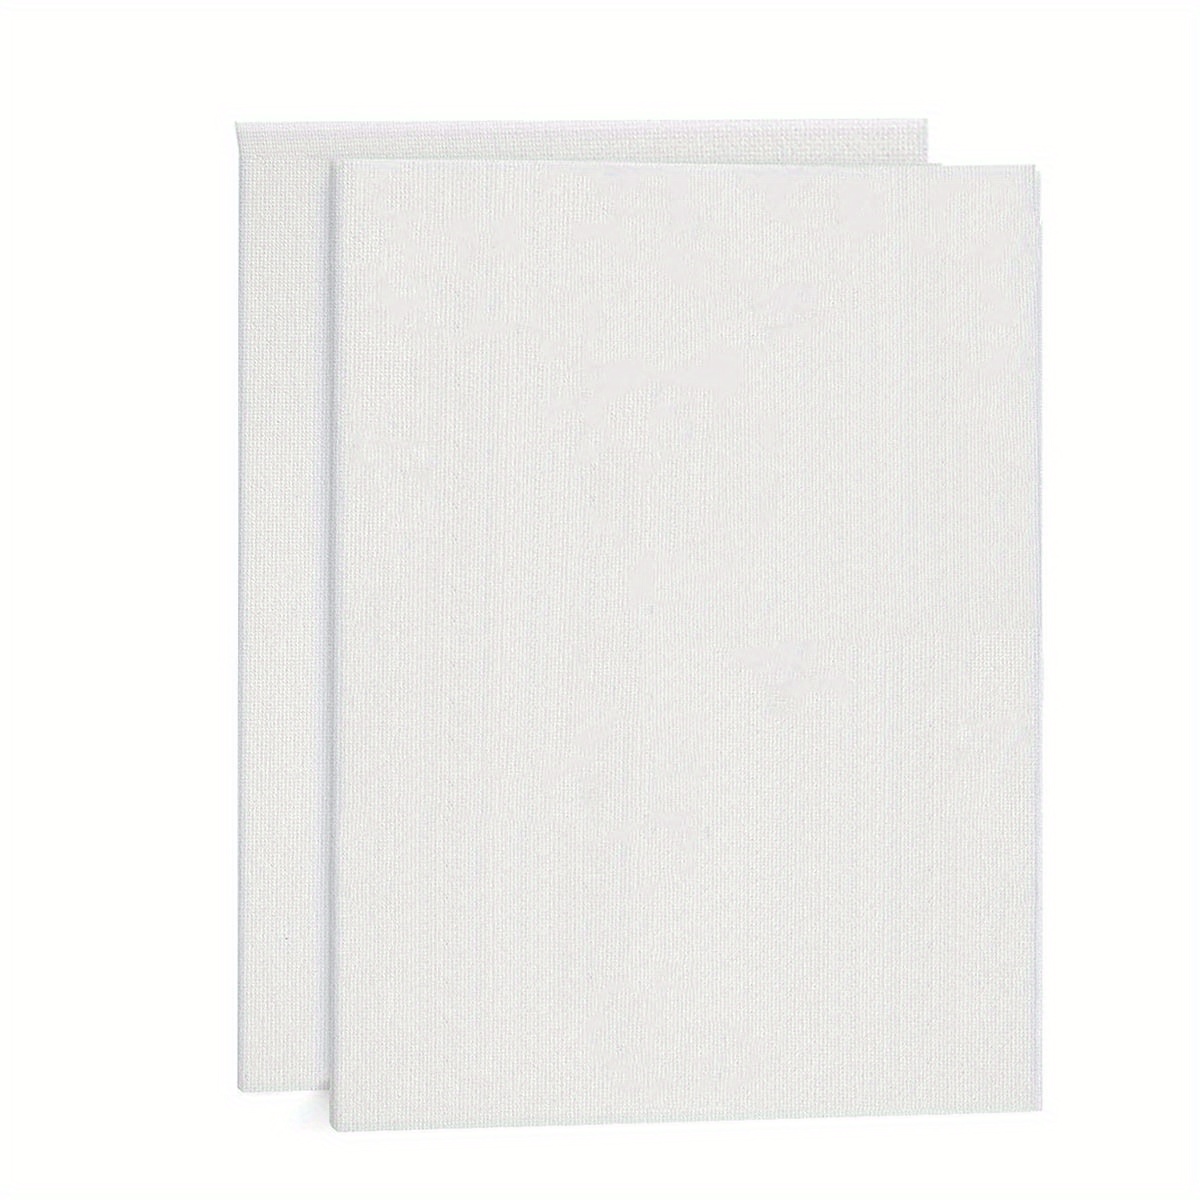 Arteza Stretched Canvas, Classic, White, 10x10, Blank Canvas Boards for Painting - 8 Pack